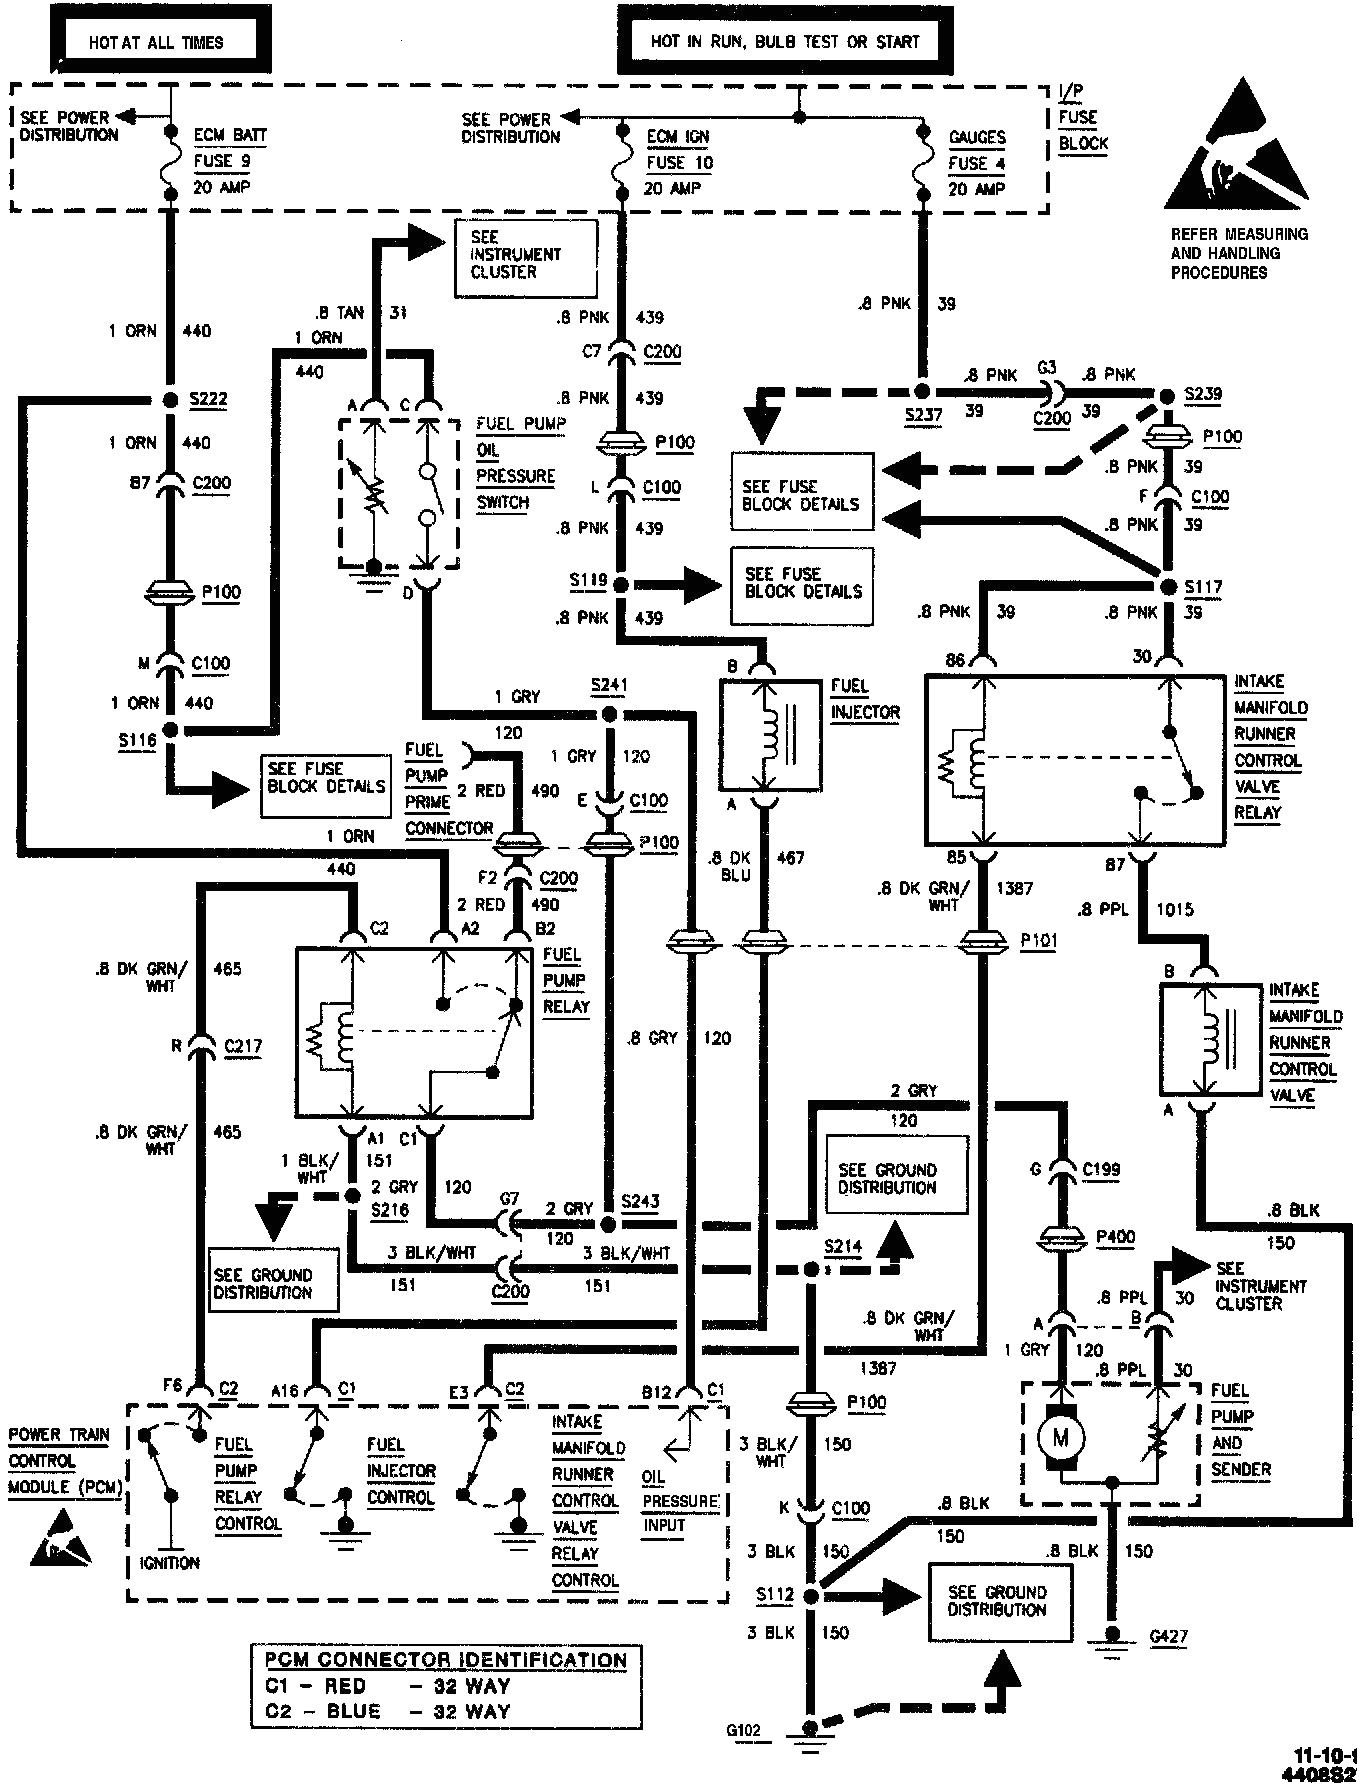 wiring diagram for 1995 chevy s10 wiring diagram operations 1995 chevy s10 alternator wiring diagram 94